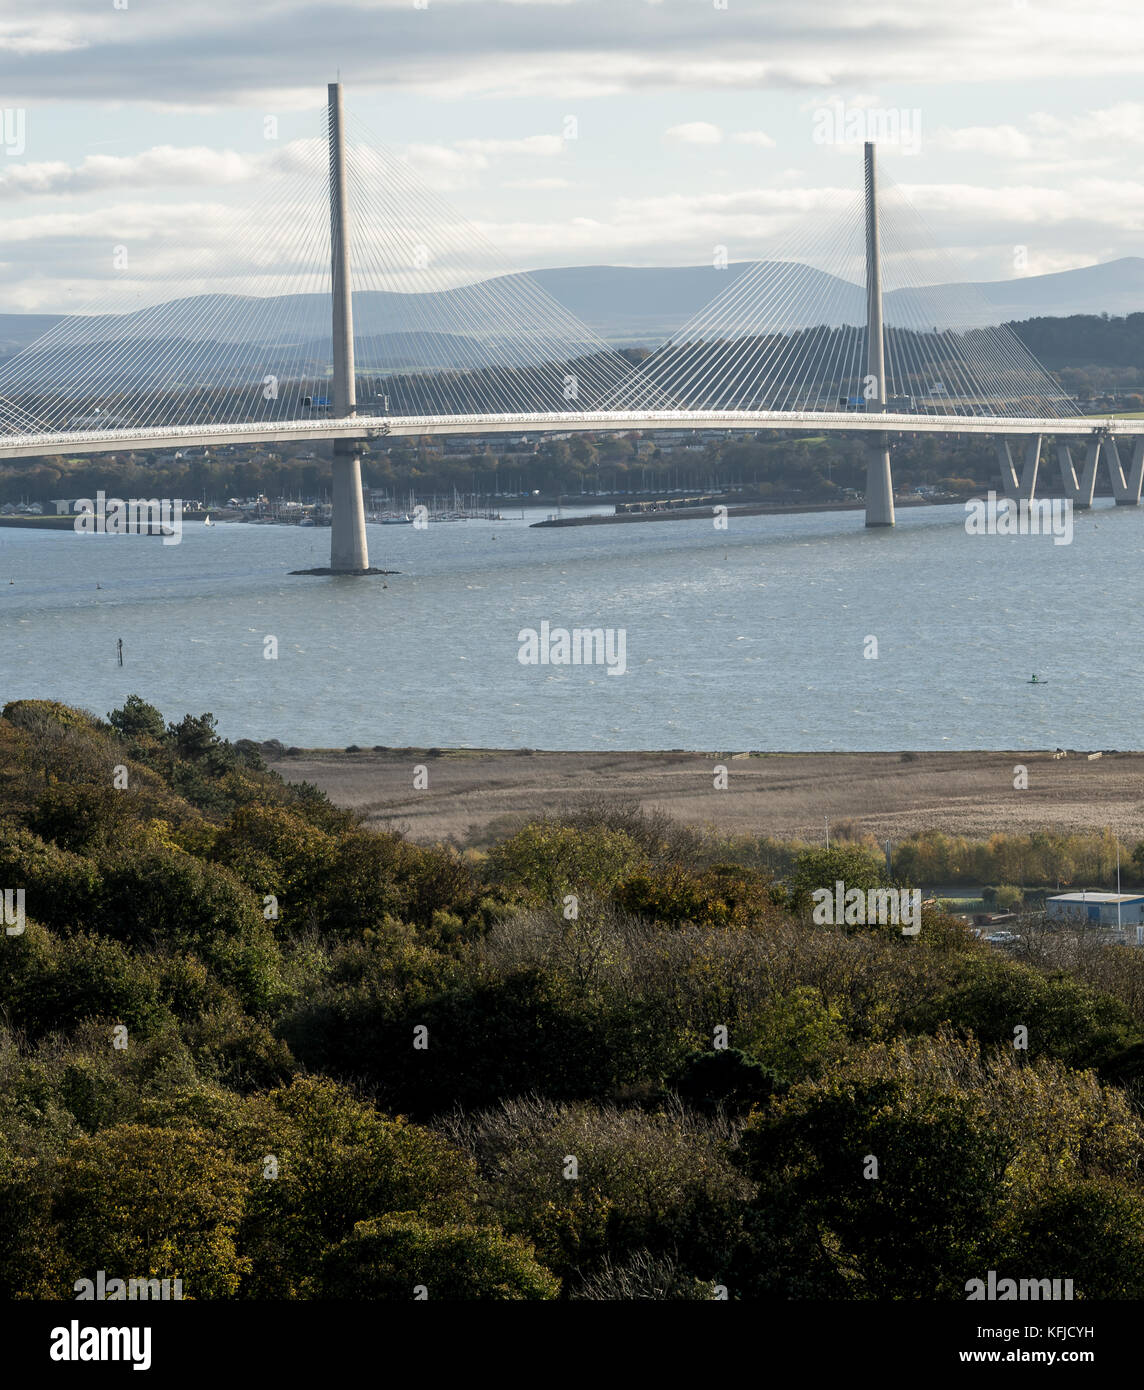 Rosyth Scotland, view of the new Queensferry crossing, a 2.7km road bridge between Edinburgh and Fife. the longest three-tower, cable-stayed bridge in Stock Photo